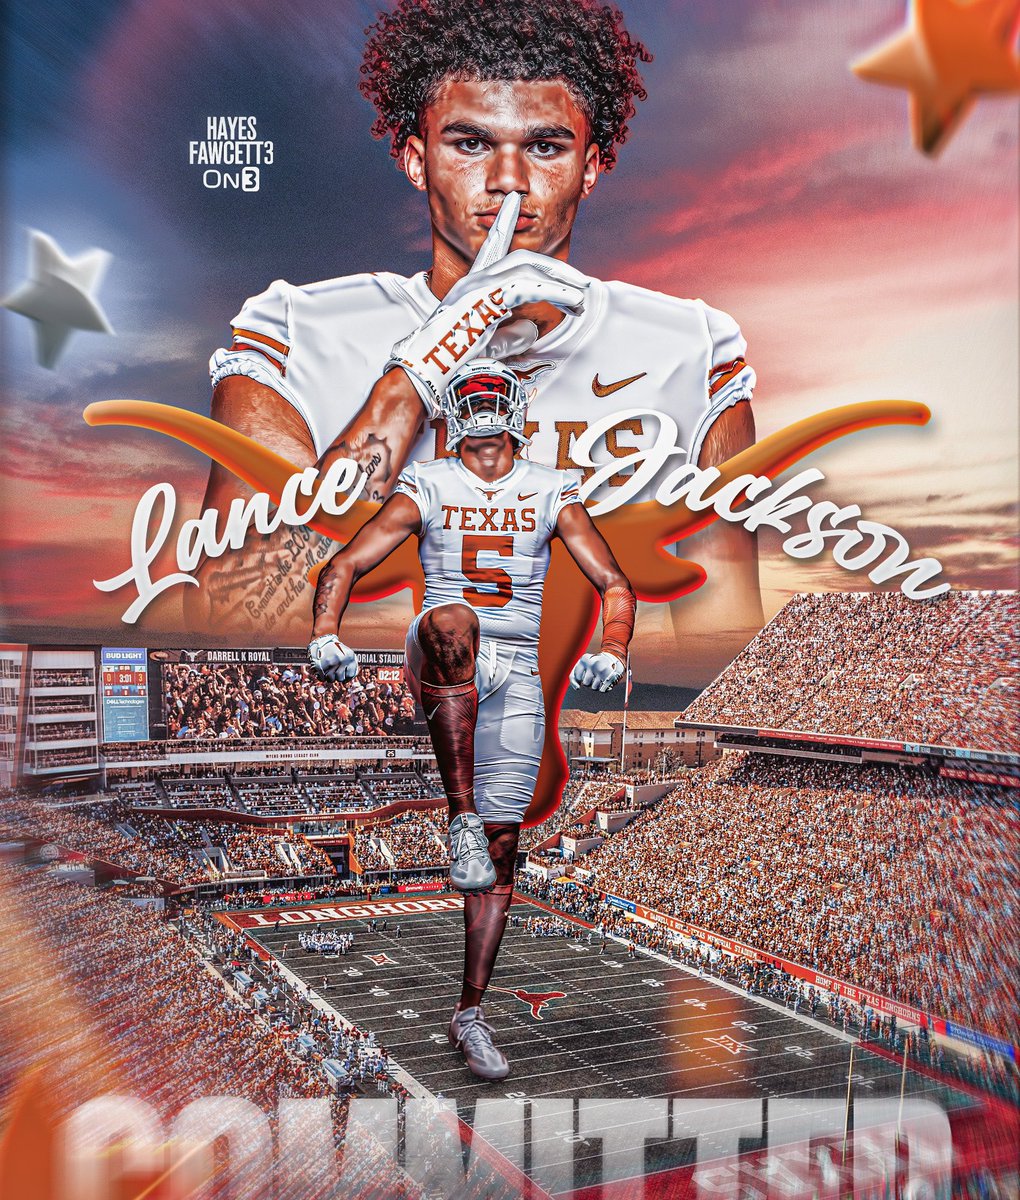 BREAKING: Four-Star ATH Lance Jackson (2025) tells me he has Committed to Texas! The 6’6 260 ATH from Texarkana, TX chose the Longhorns over Tennessee & Arkansas “Hook ‘Em #wereback🤘🏽” on3.com/news/four-star…